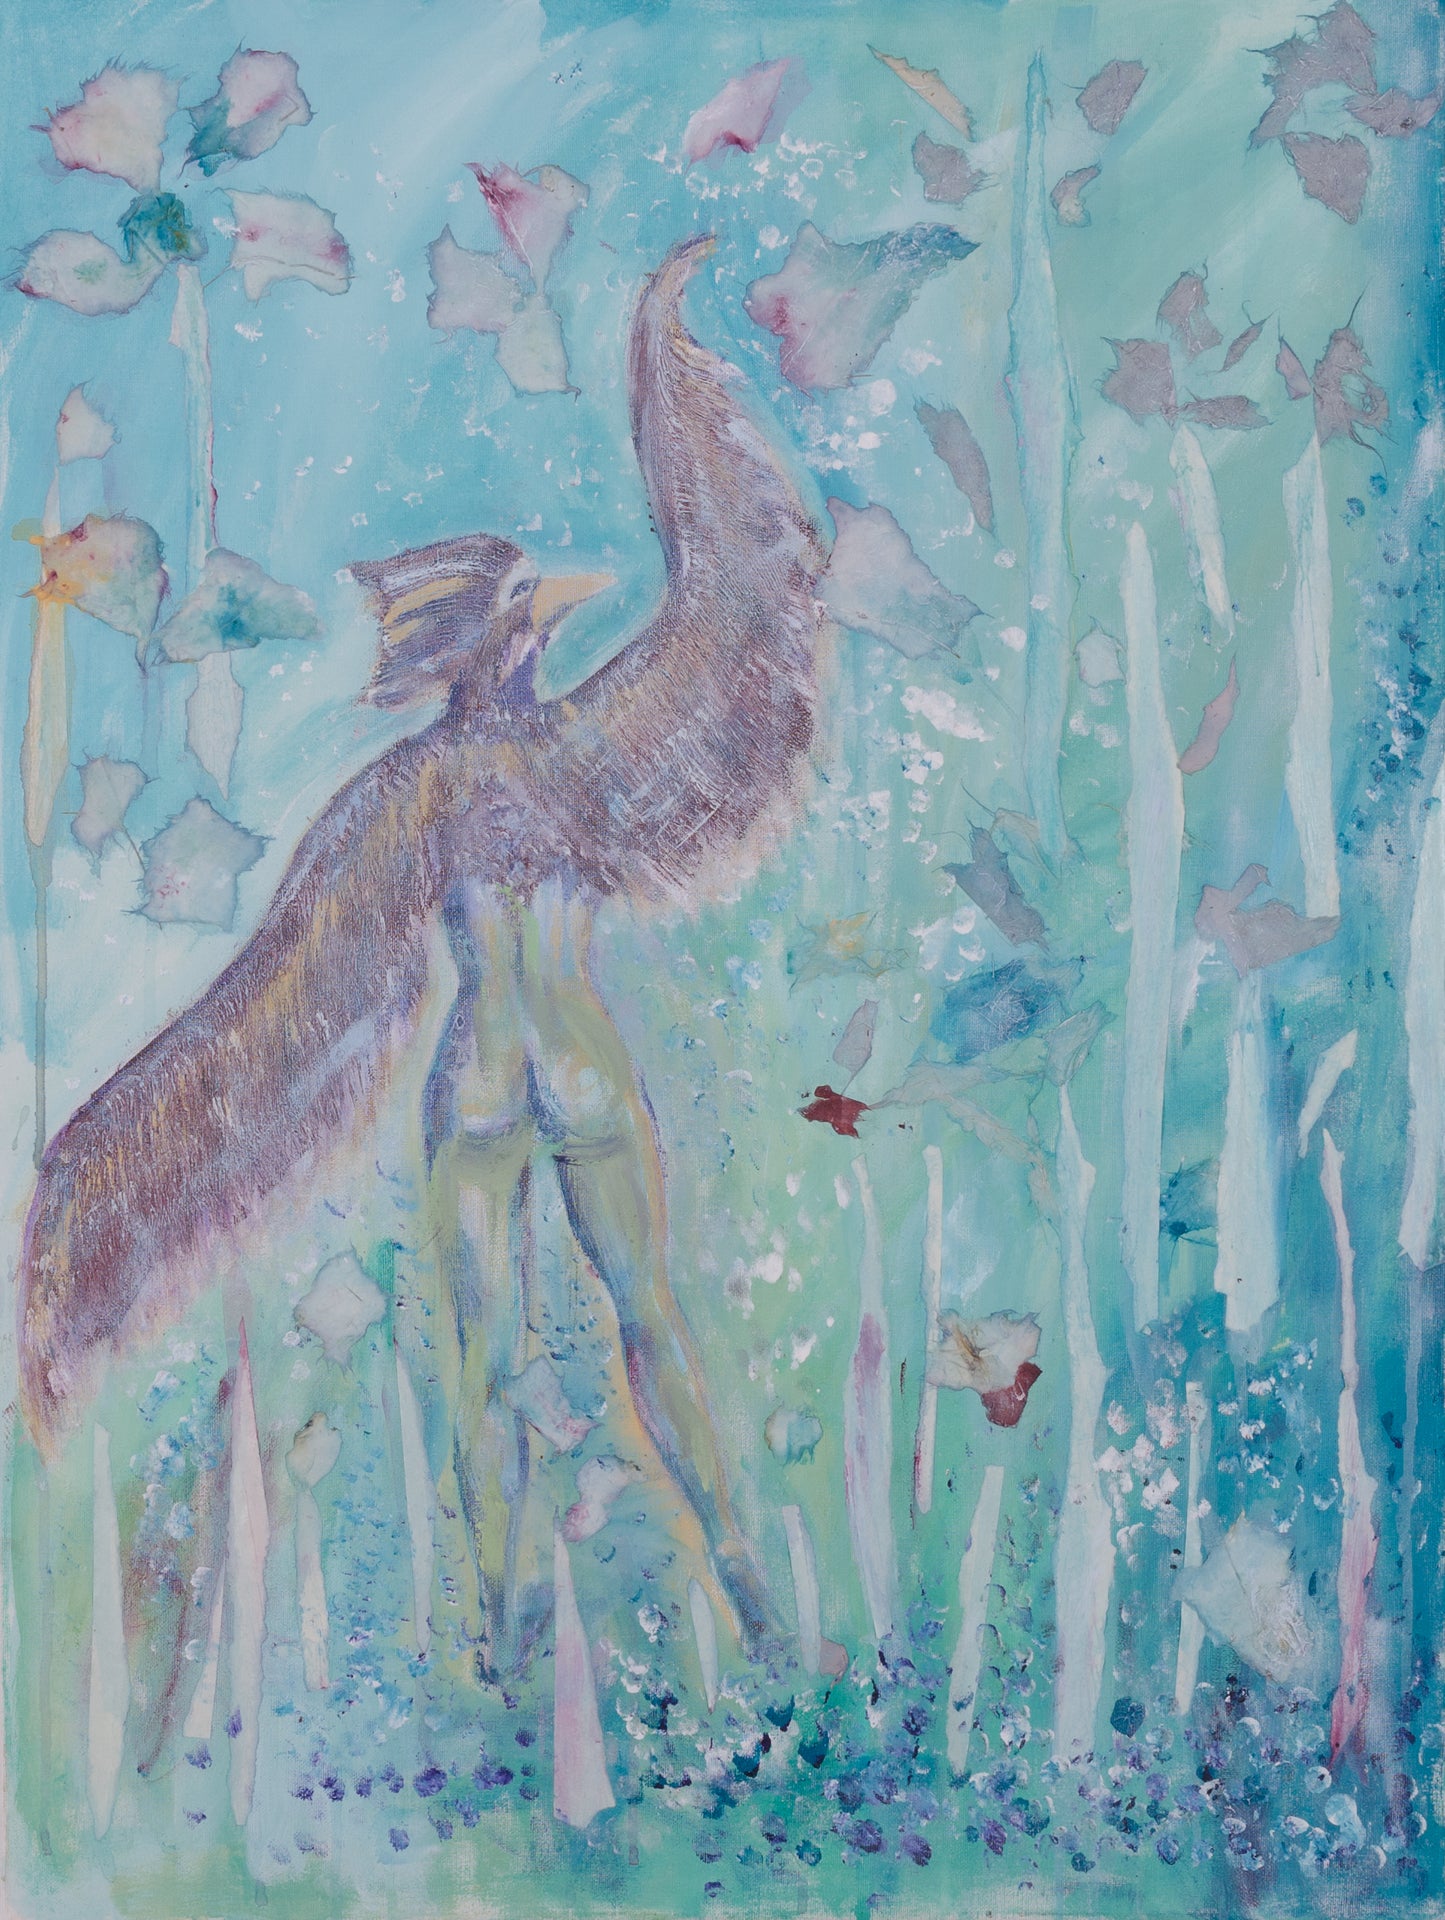 The land of the winged people - 60×80 cm